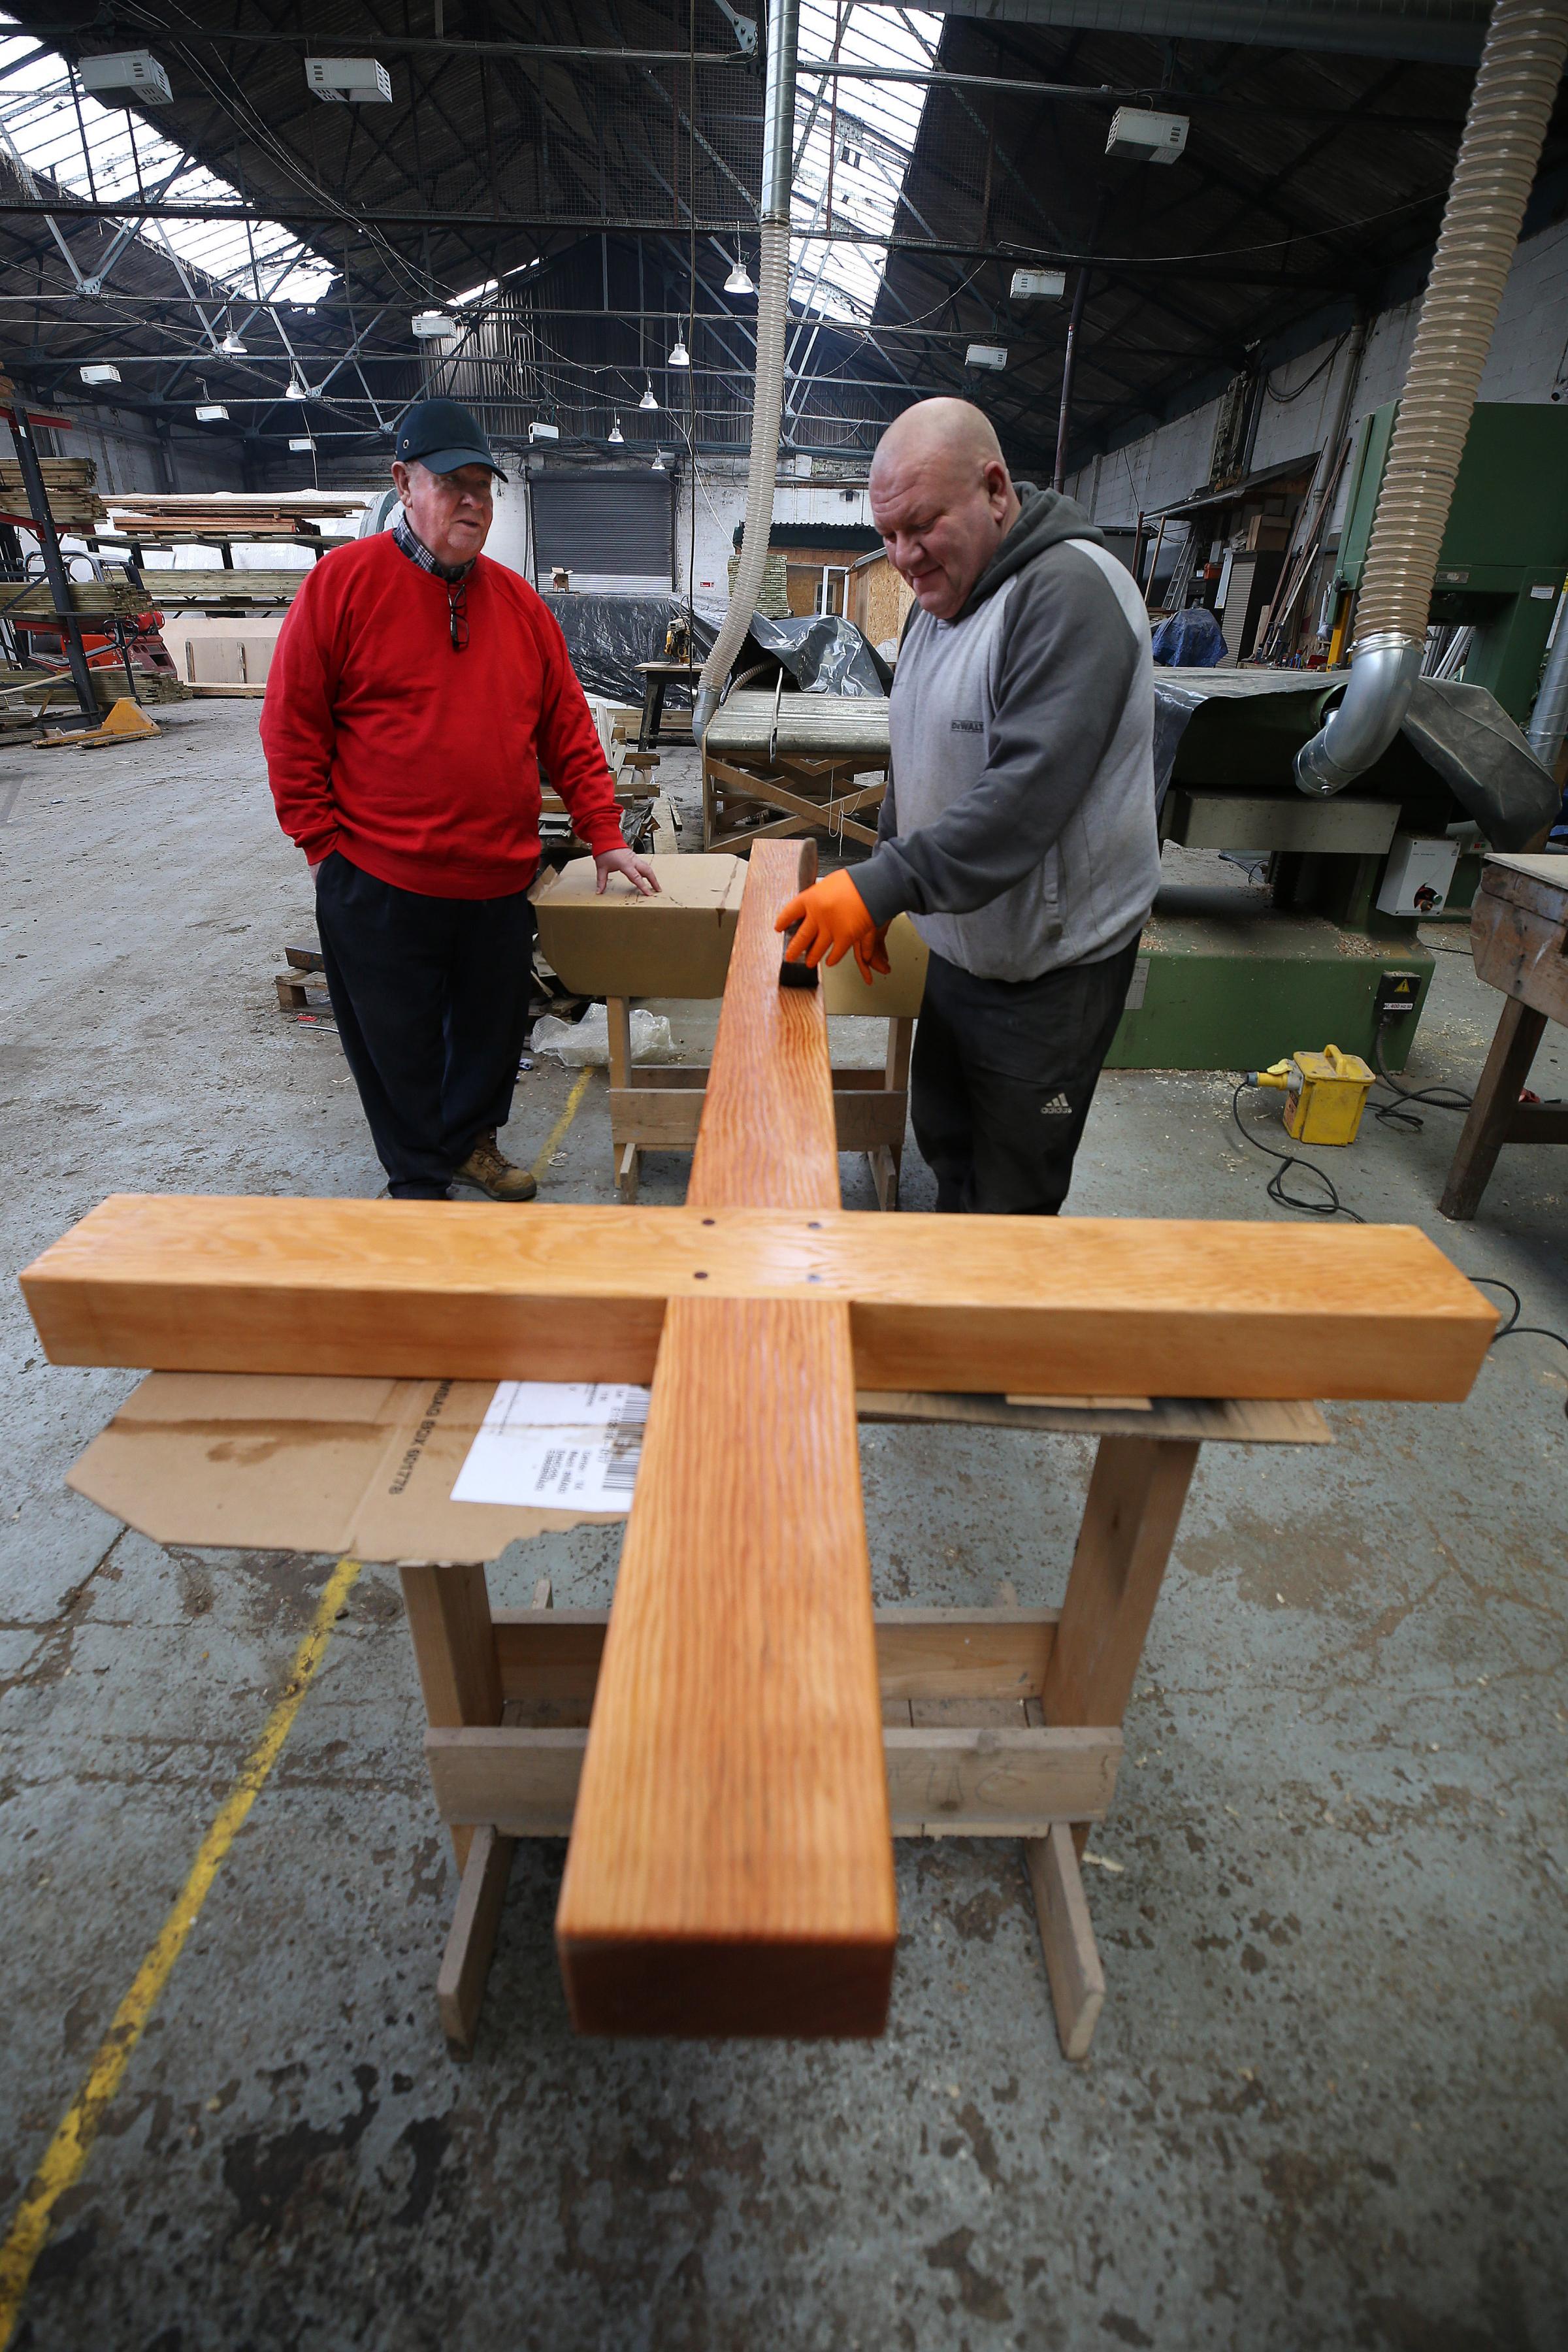 Joe Kilmartin of the Bullwood Project, left, with Scott McIlwraith who puts the finishing touches to the wooden cross made for Cathcart Old Parish Church.